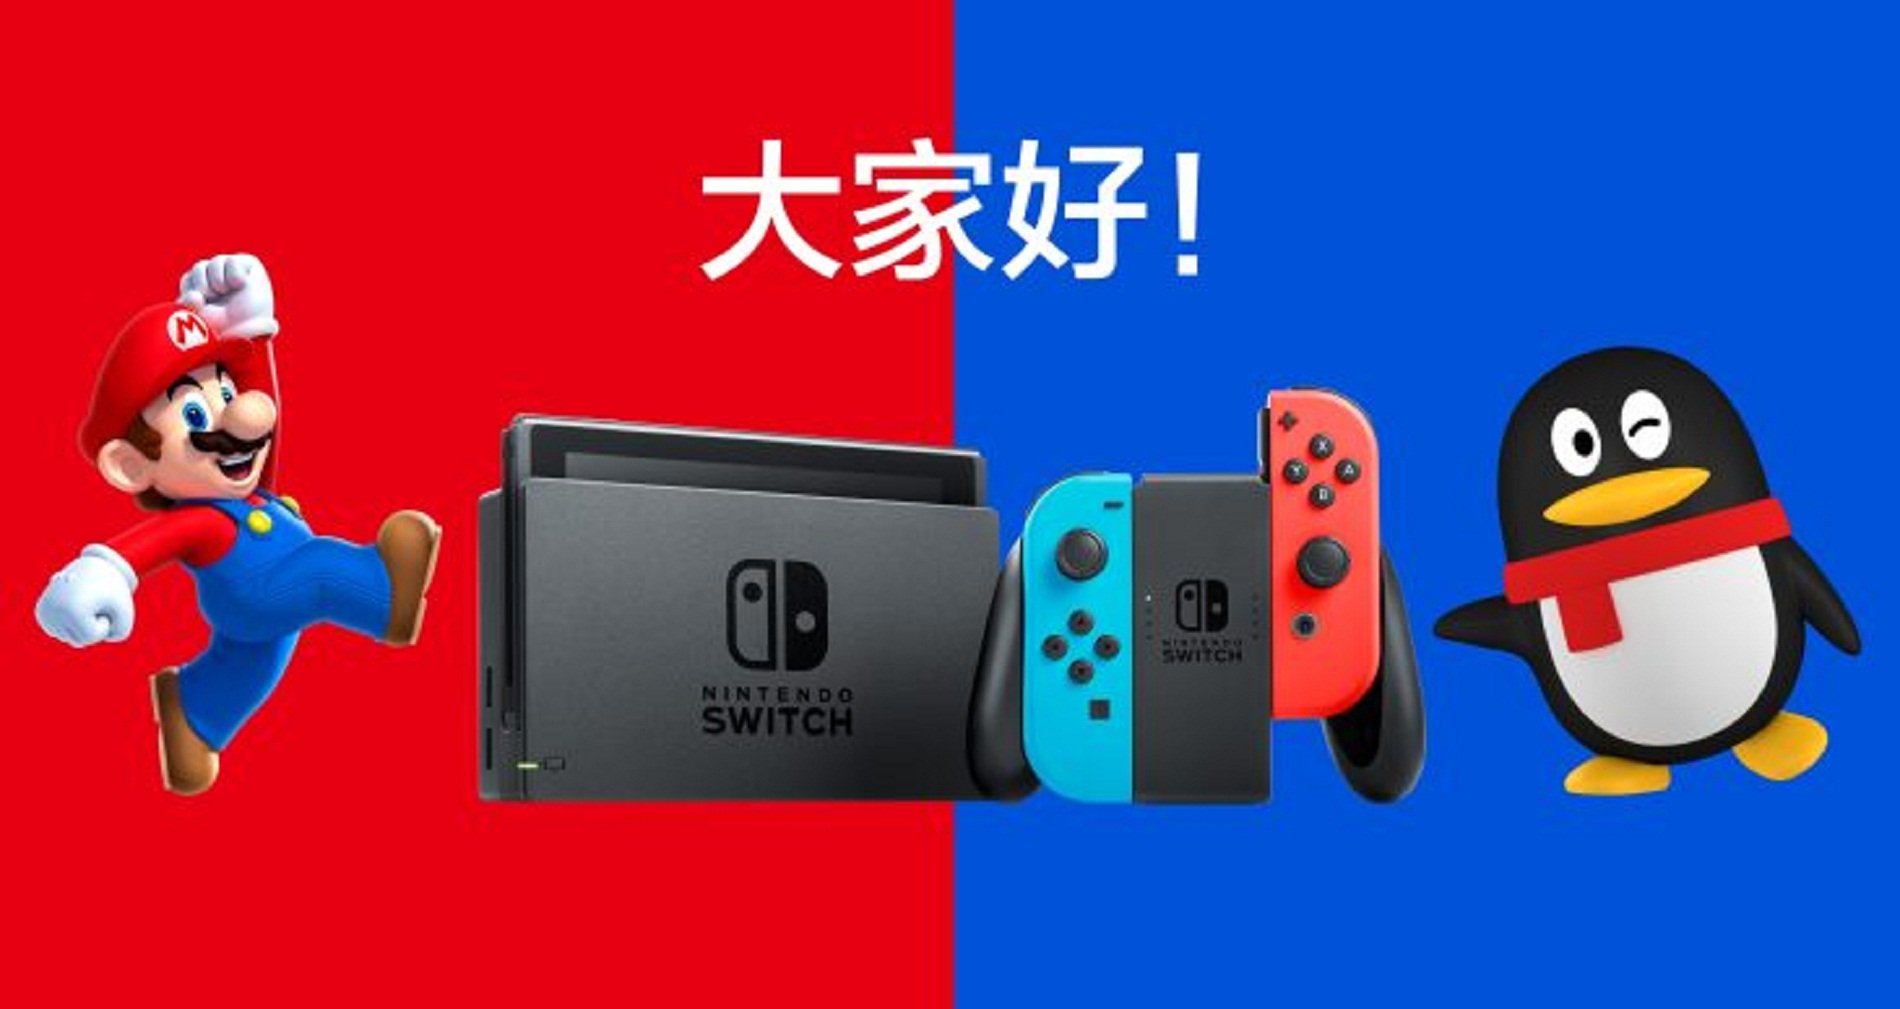 US Justice Posts That Two Members Of Nintendo Switch Chip Pirate Scene Team Xecuter In Custody